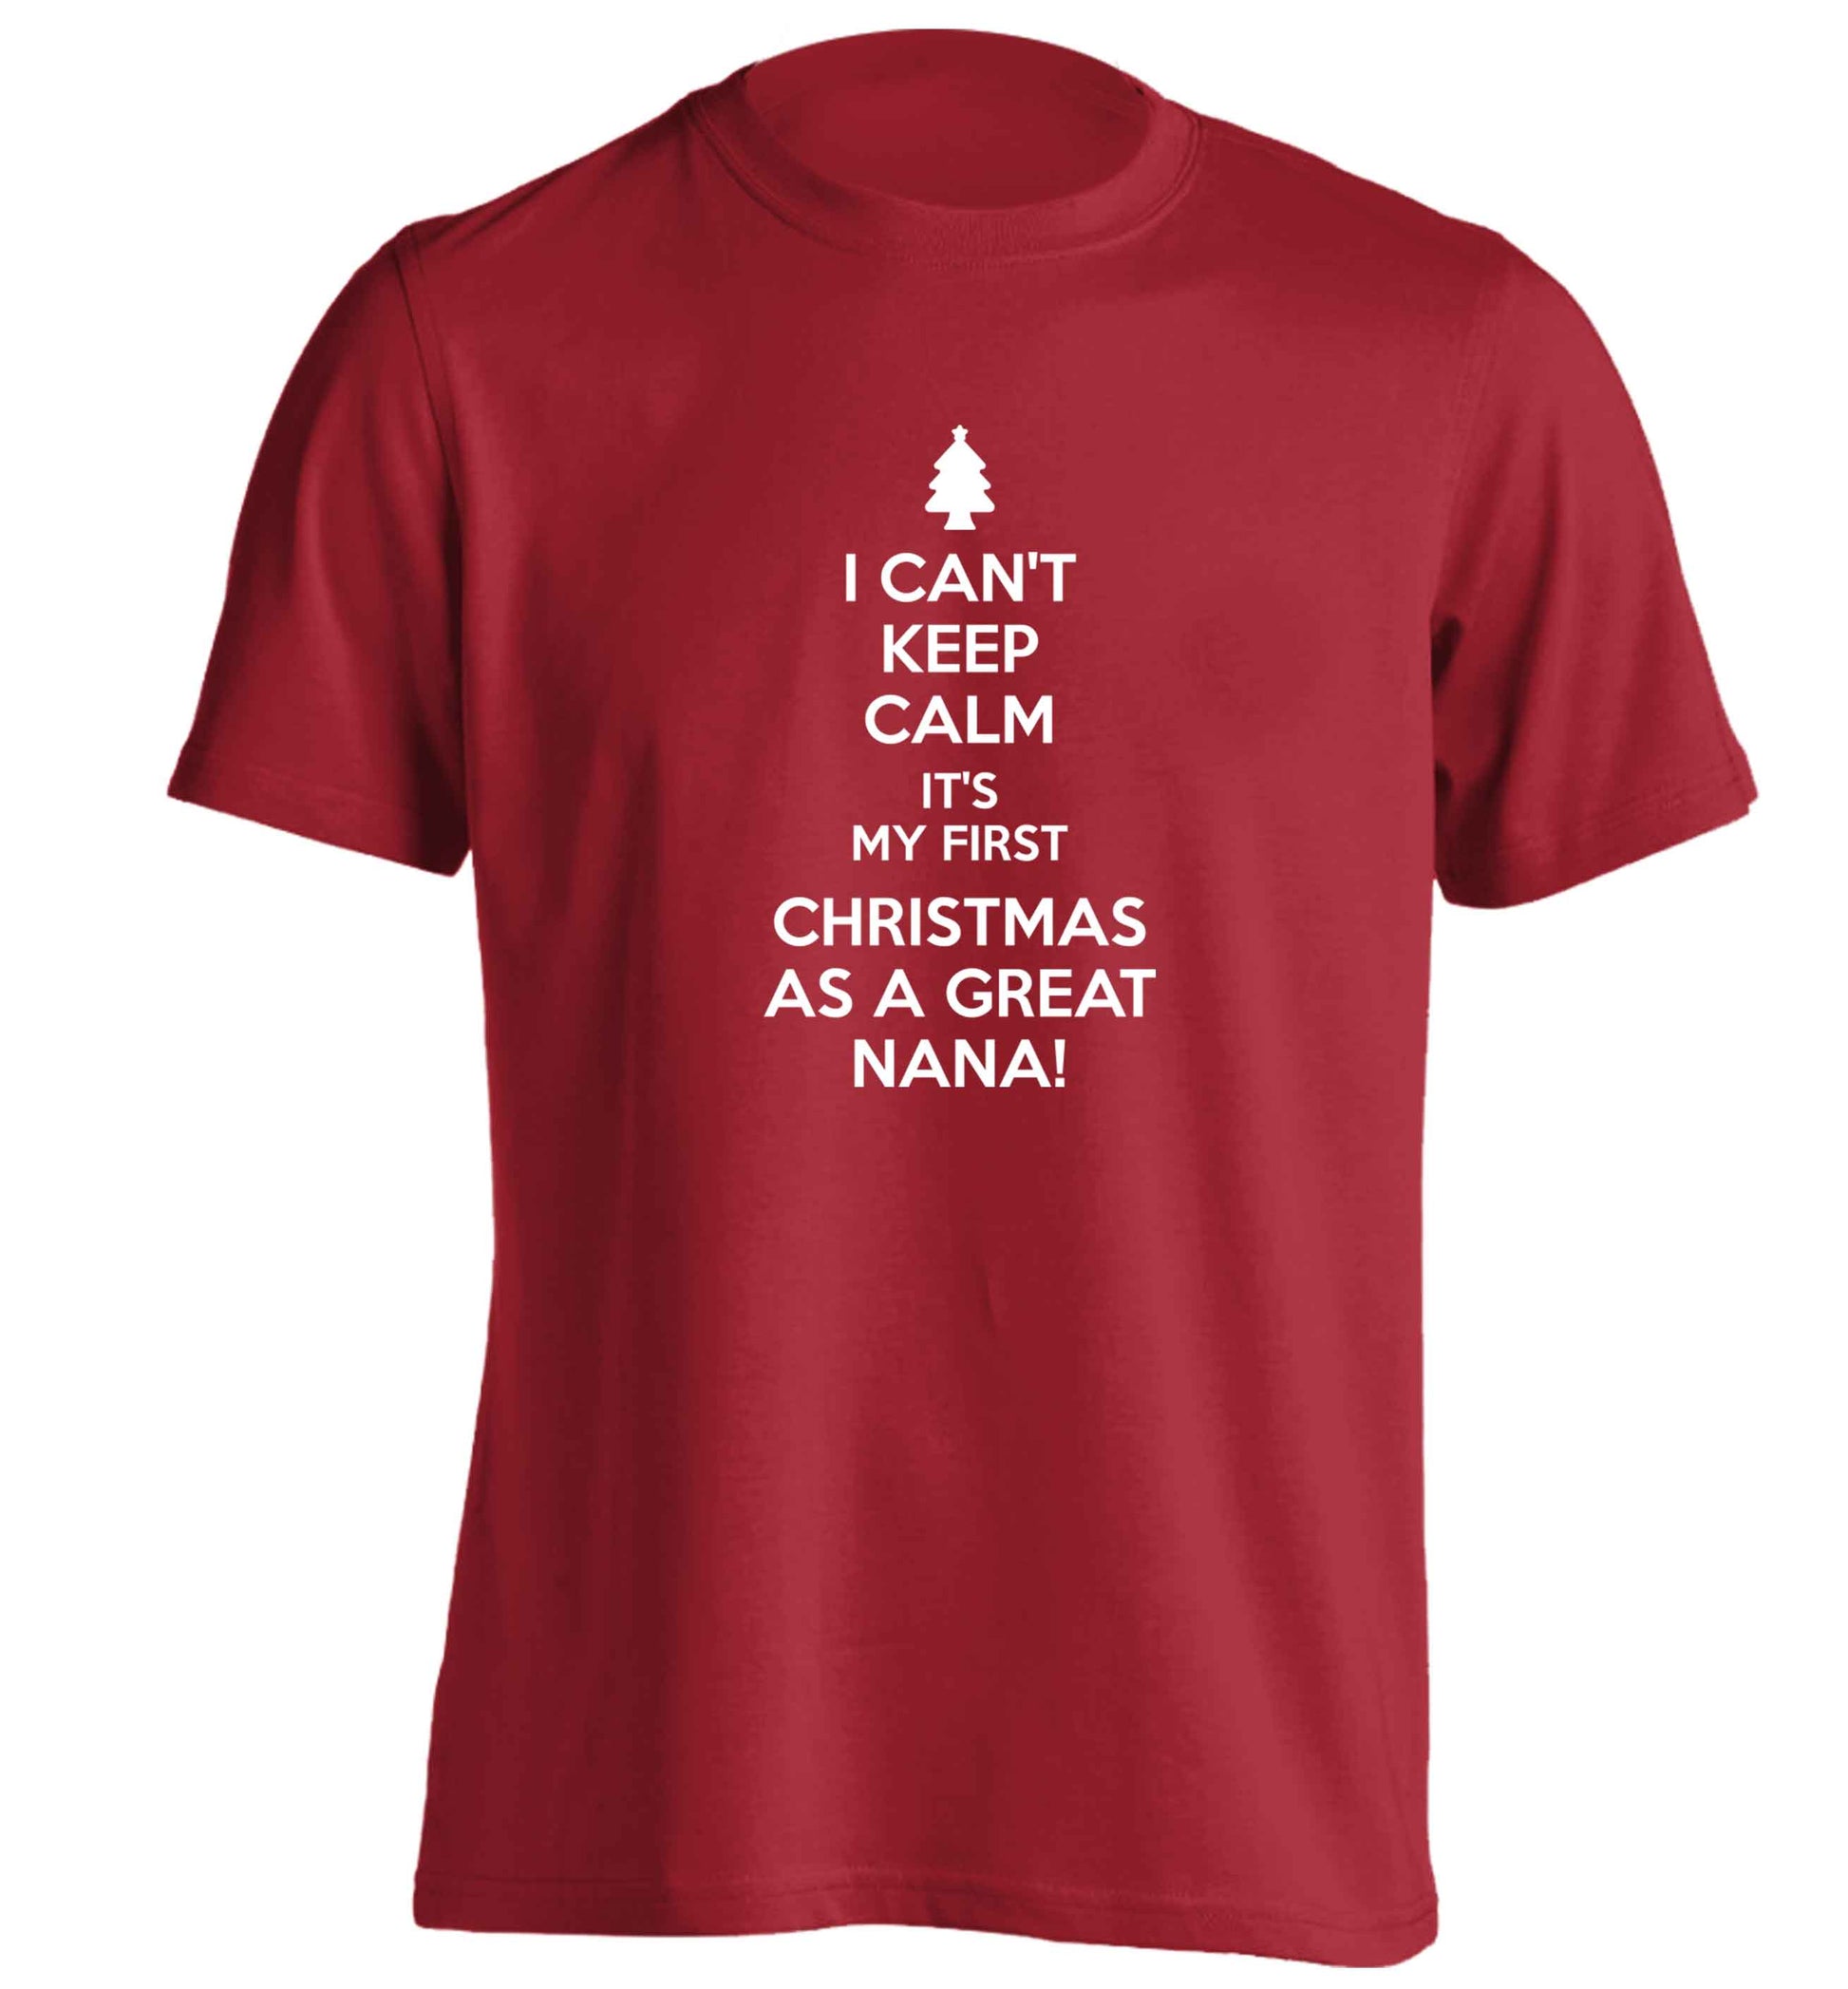 I can't keep calm it's my first Christmas as a great nana! adults unisex red Tshirt 2XL